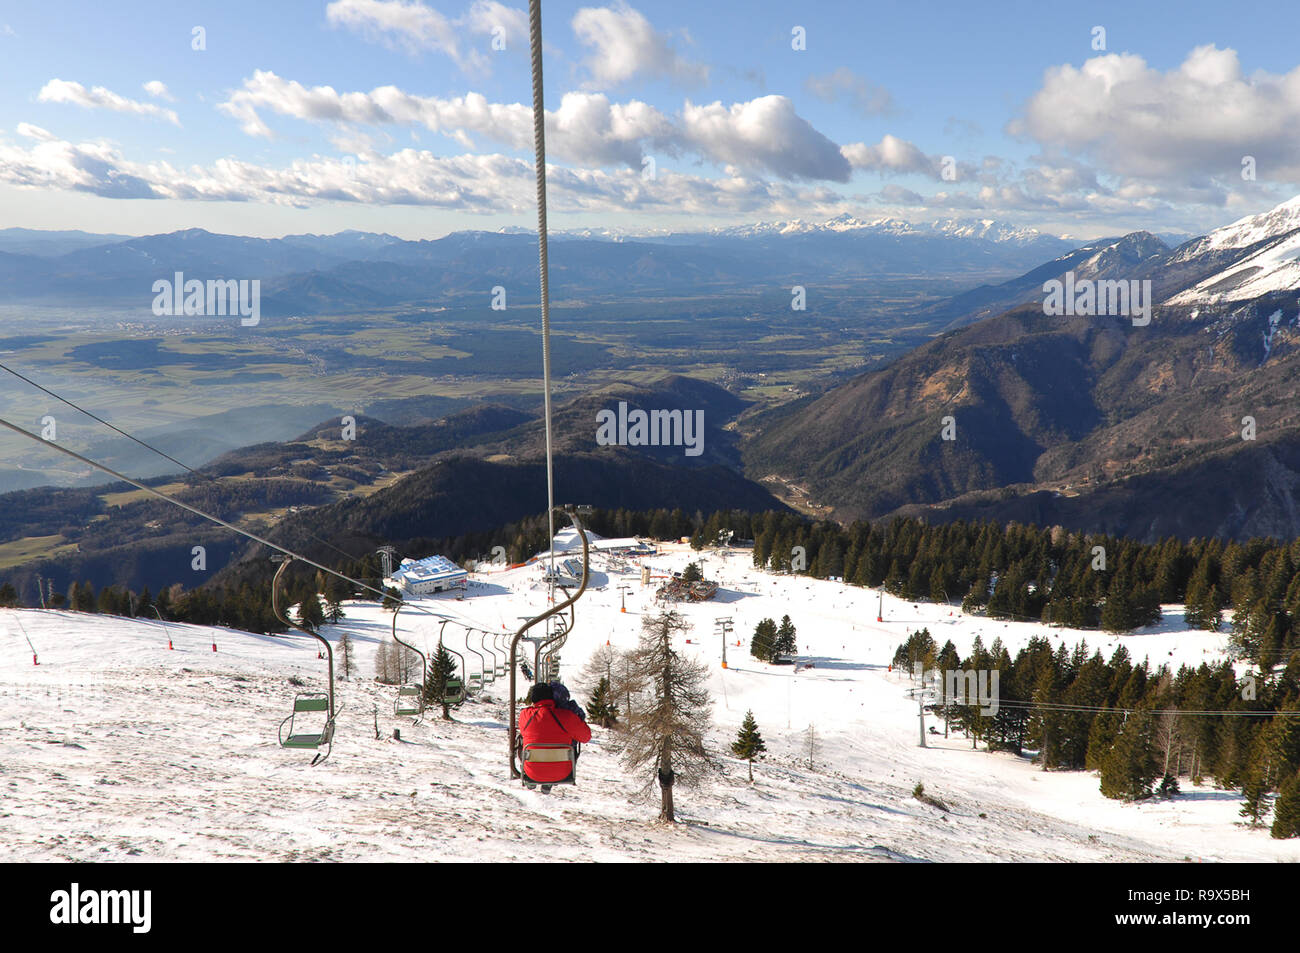 Panoramic view from skilift at Krvavec Alpine ski resort in Slovenia, Gorenjska region with Julian Alps in background, wintersport and travel Stock Photo